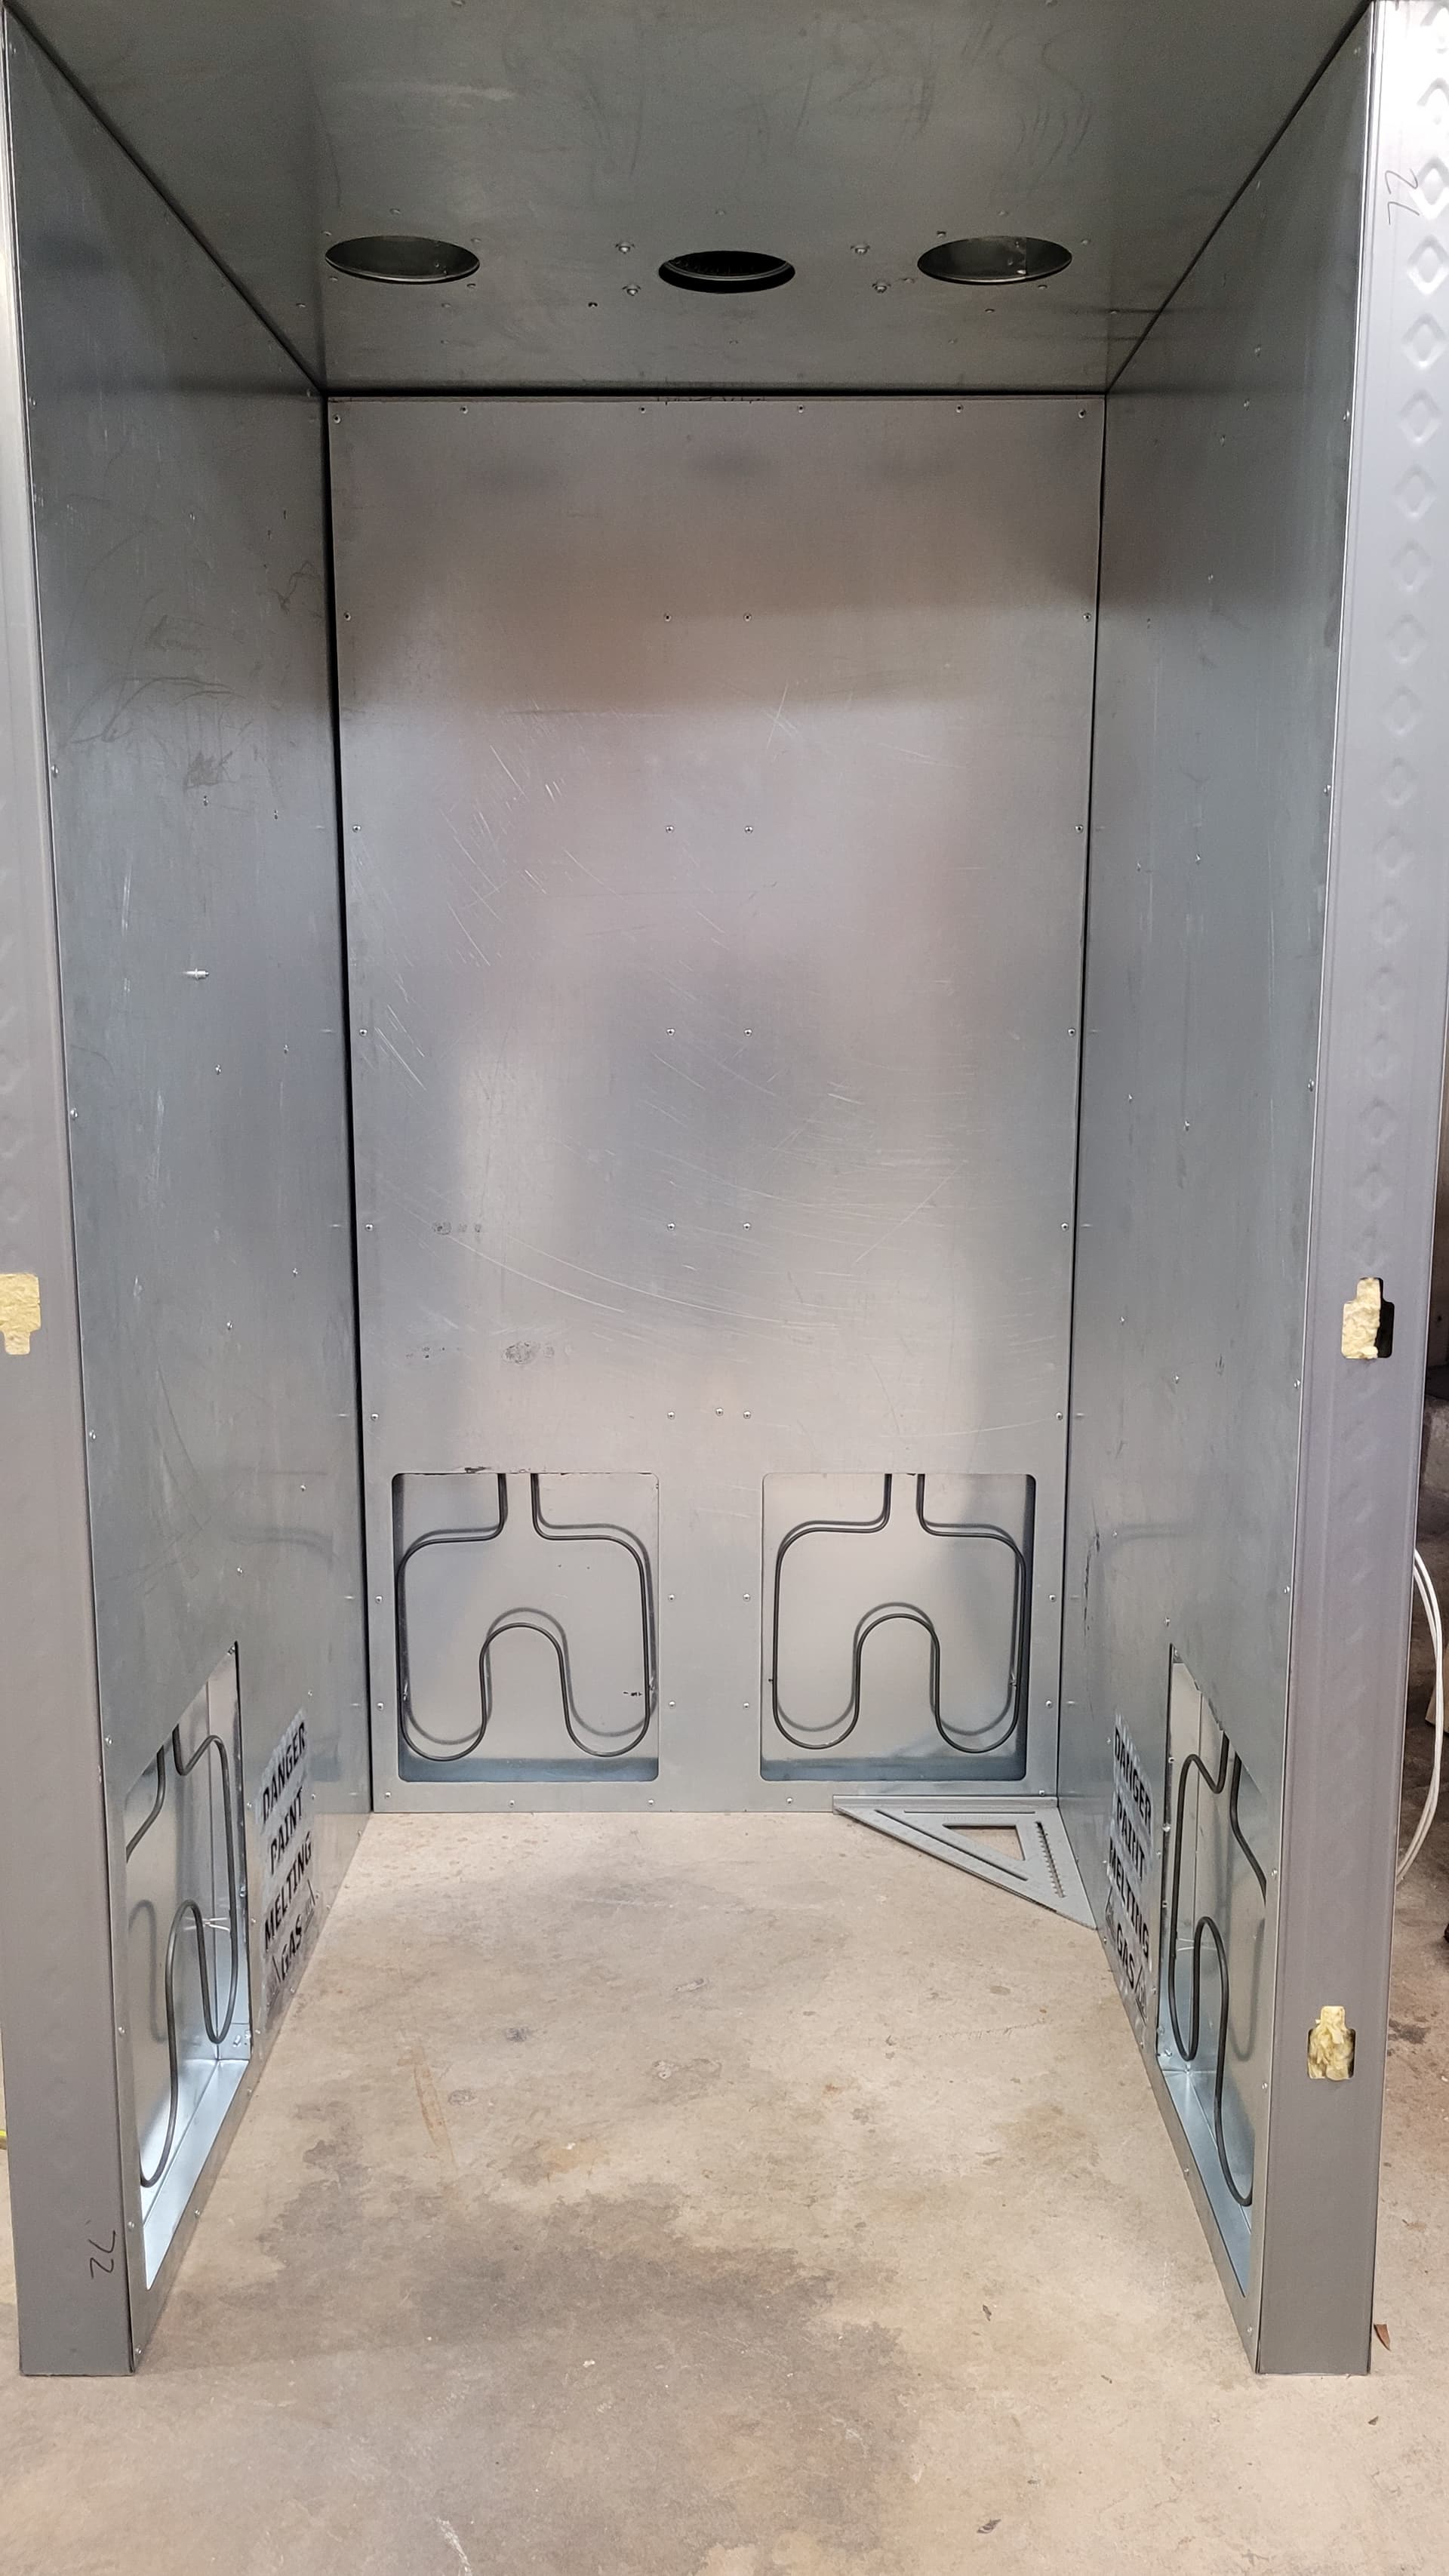 Double oven powder coat over conversion - Projects - Langmuir Systems Forum